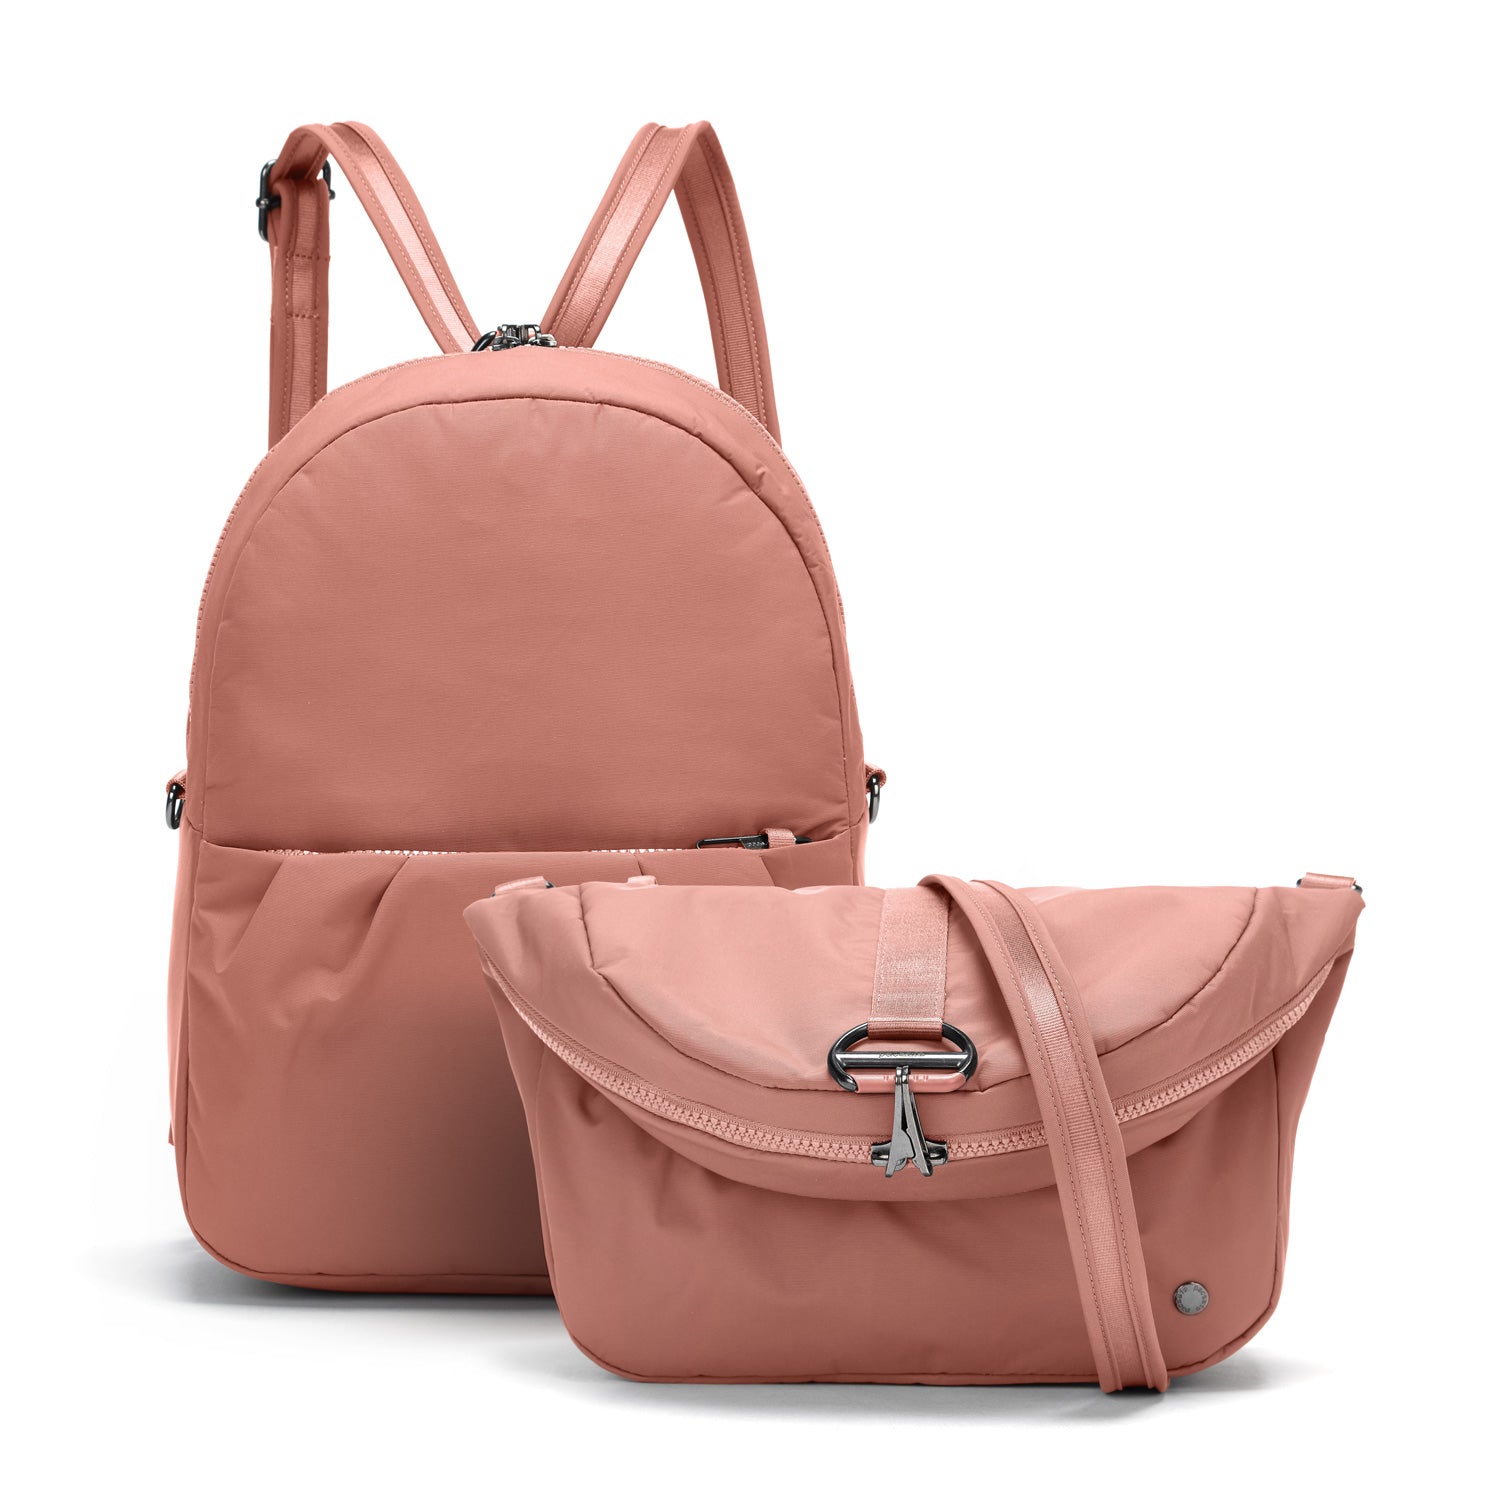 Girls Mini Leather Backpack Purse 3 Pieces Set Bowknot Small Backpack Cute  Casual Travel Daypacks Pink - Walmart.com